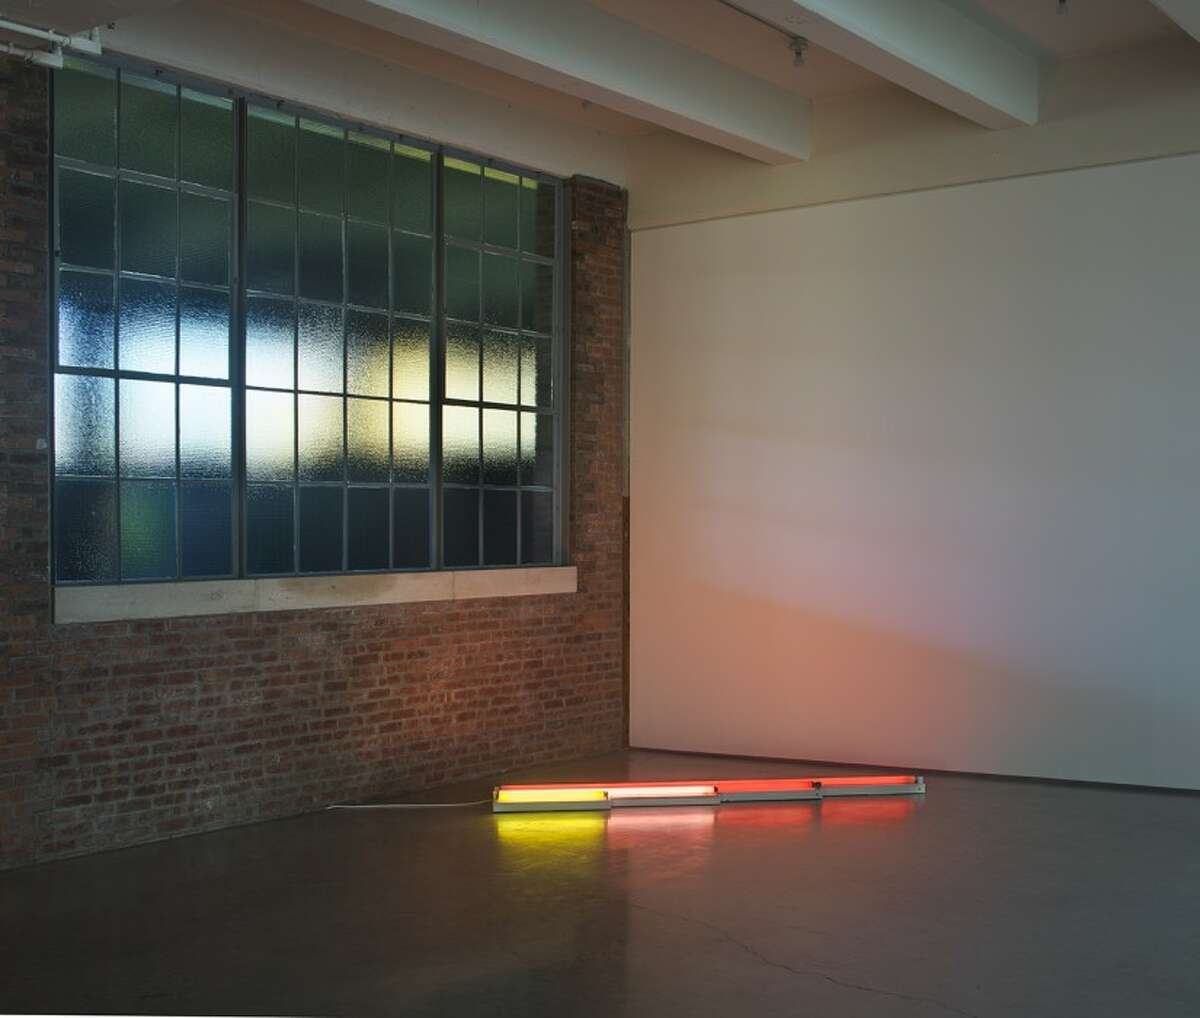 Dia. Dan Flavin, gold, pink, and red, red, 1964. c. Stephen Flavin/Artists Rights Society (ARS), New York.